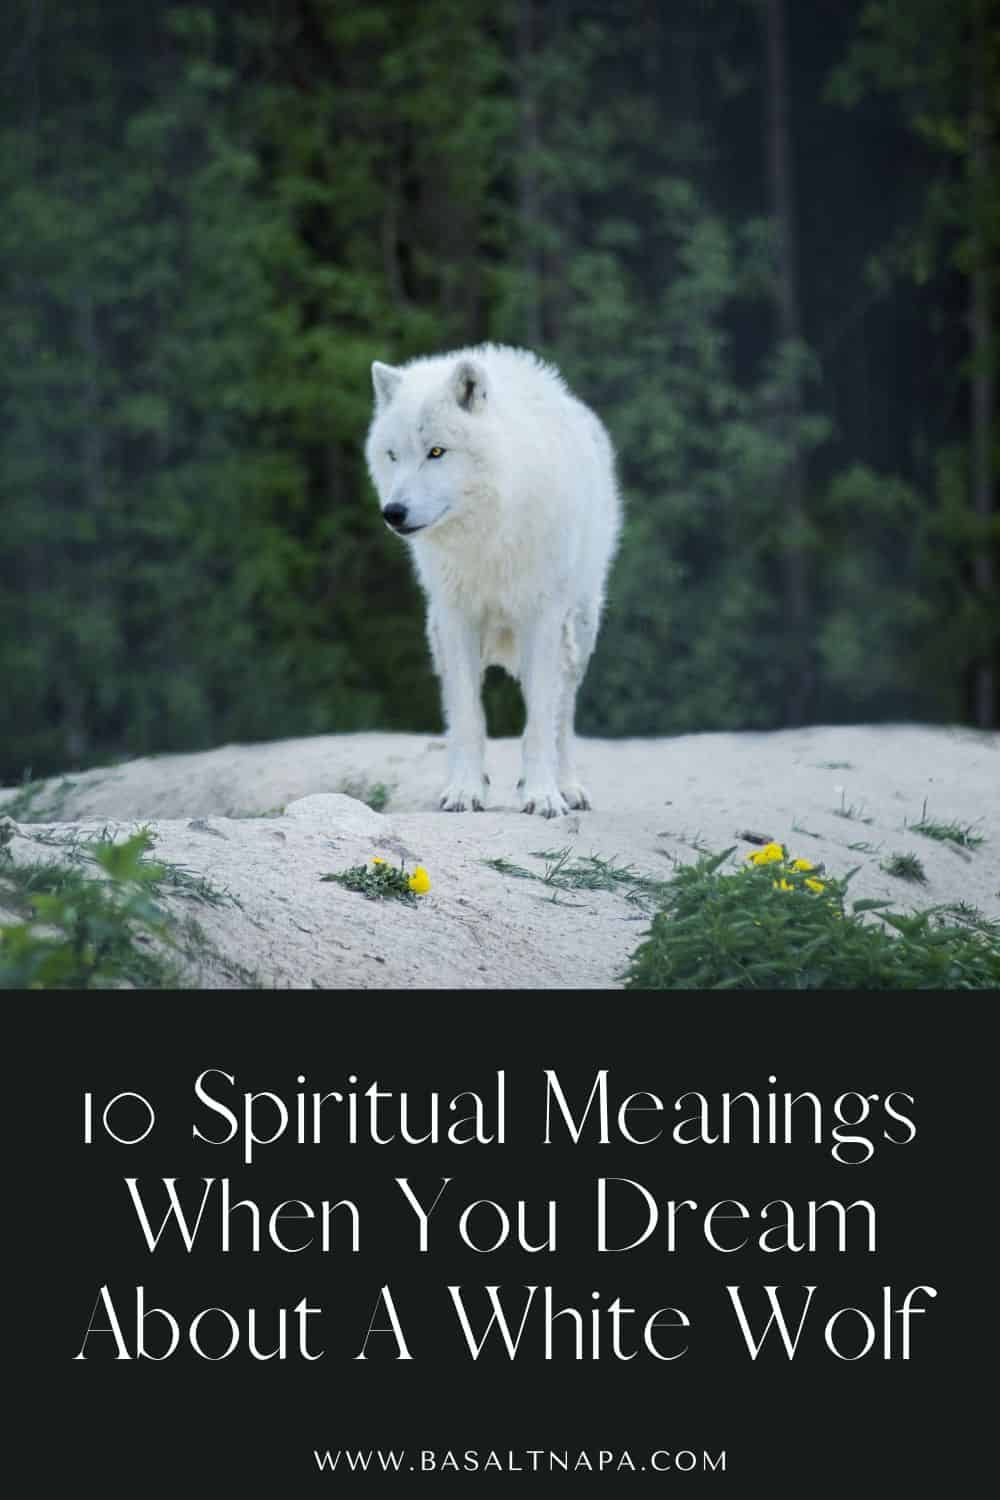 10 Spiritual Meanings When You Dream About A White Wolf